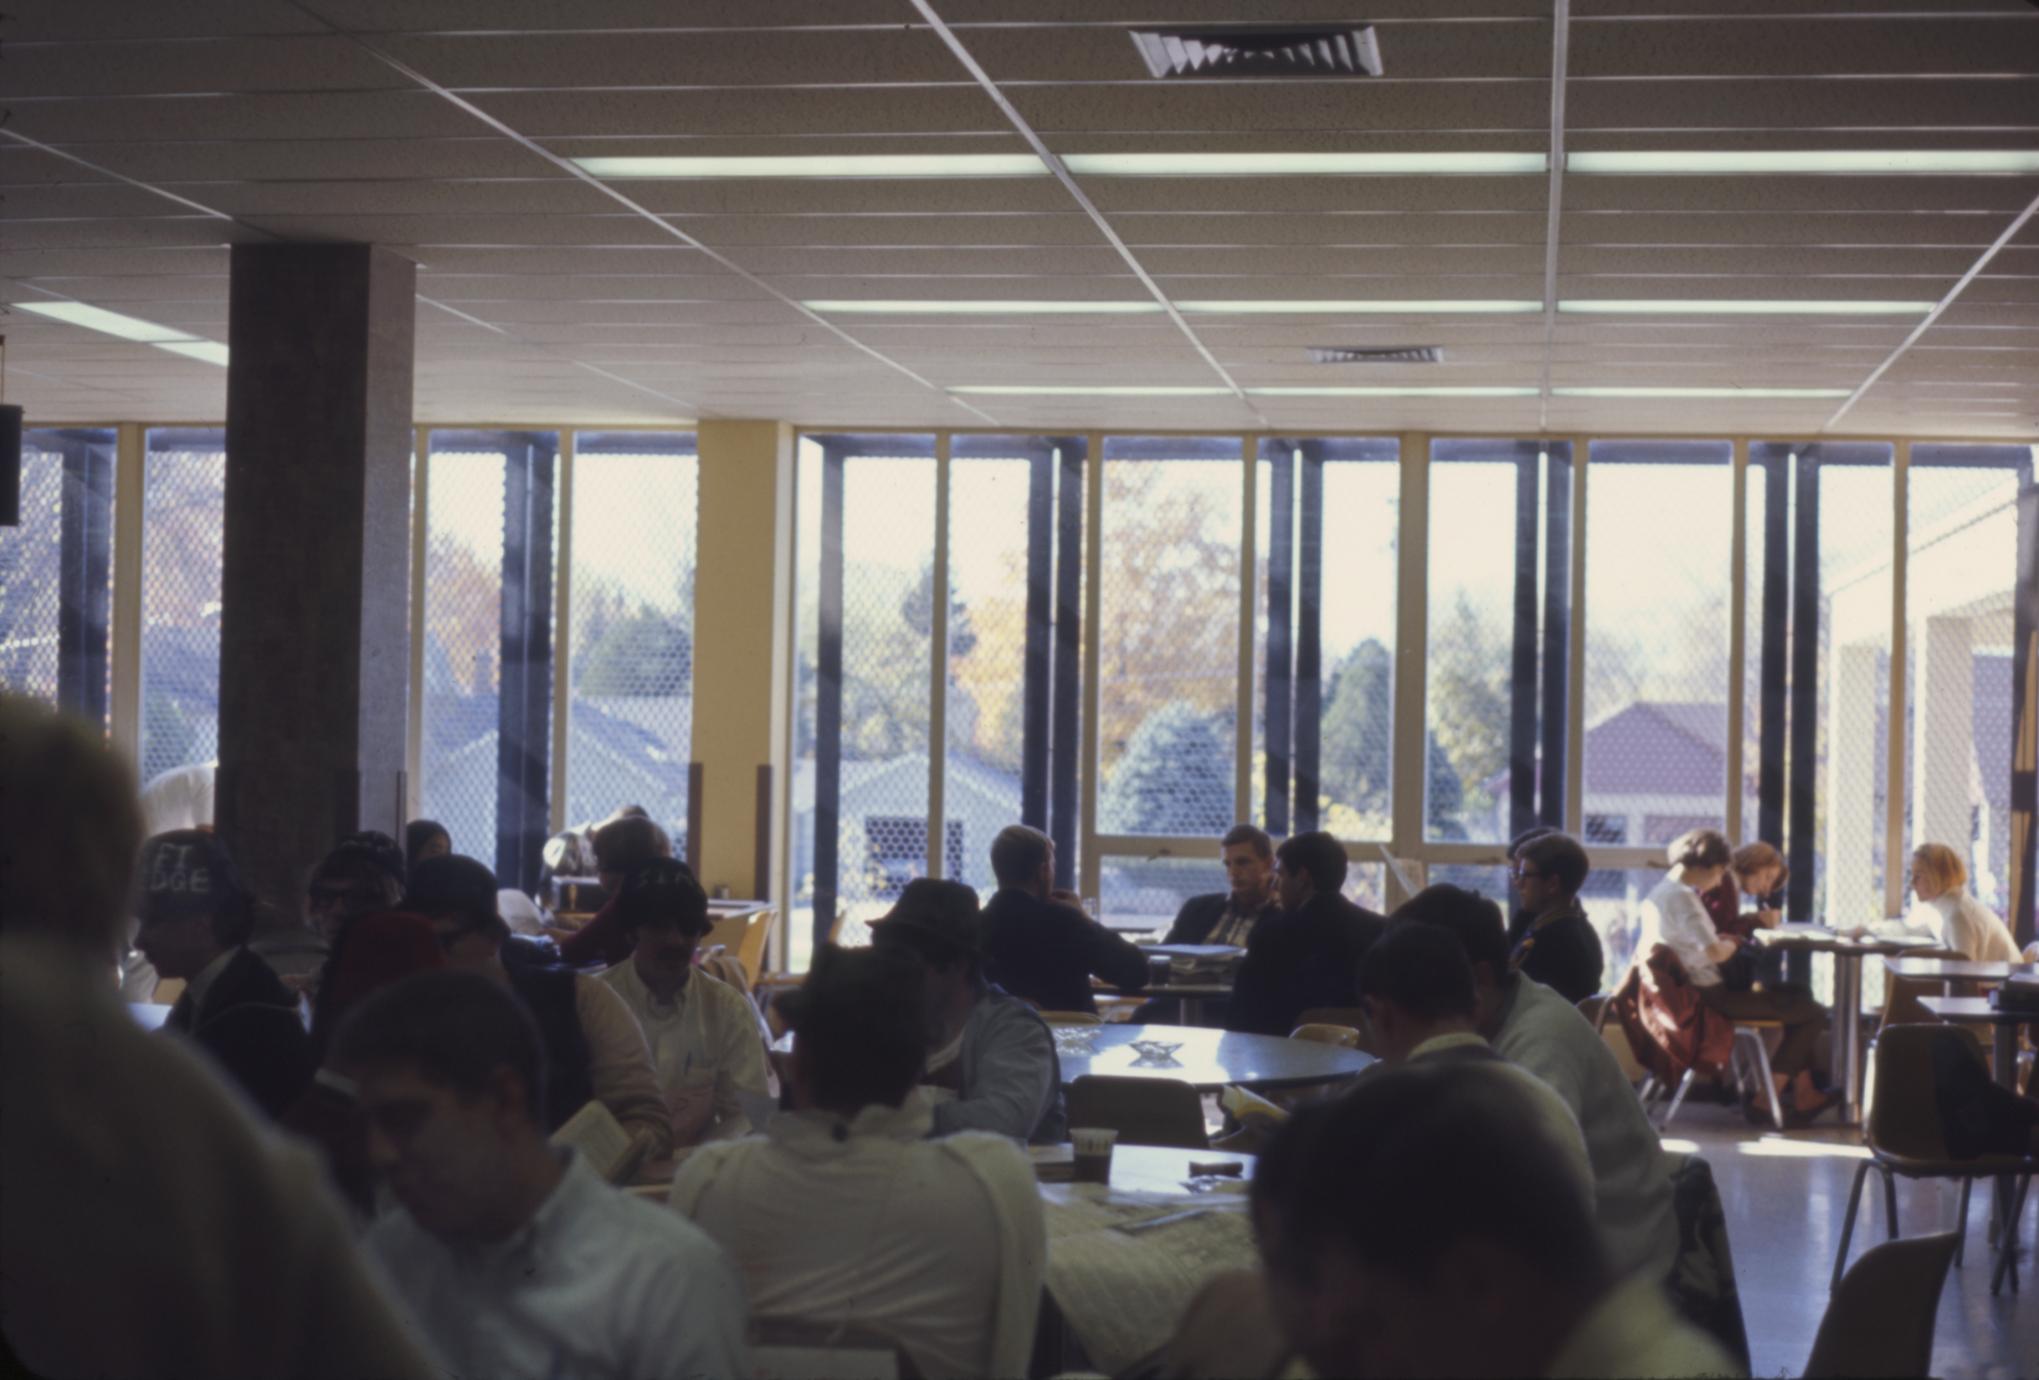 Campus food service in the 1960s